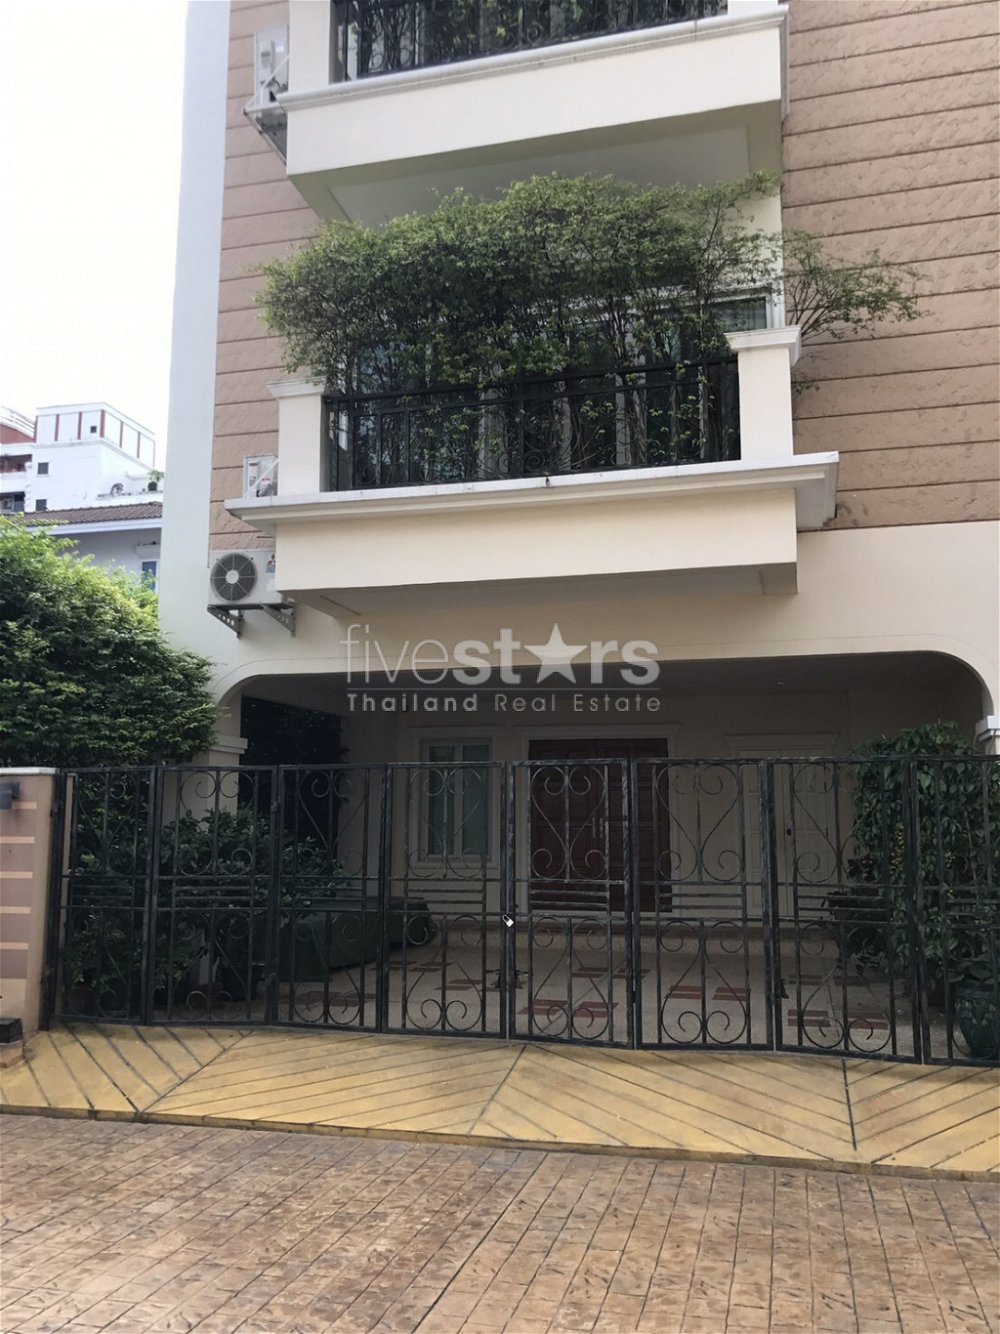 For Sale Modern Townhome in compound 3 bedrooms on Petchaburi road 757402741